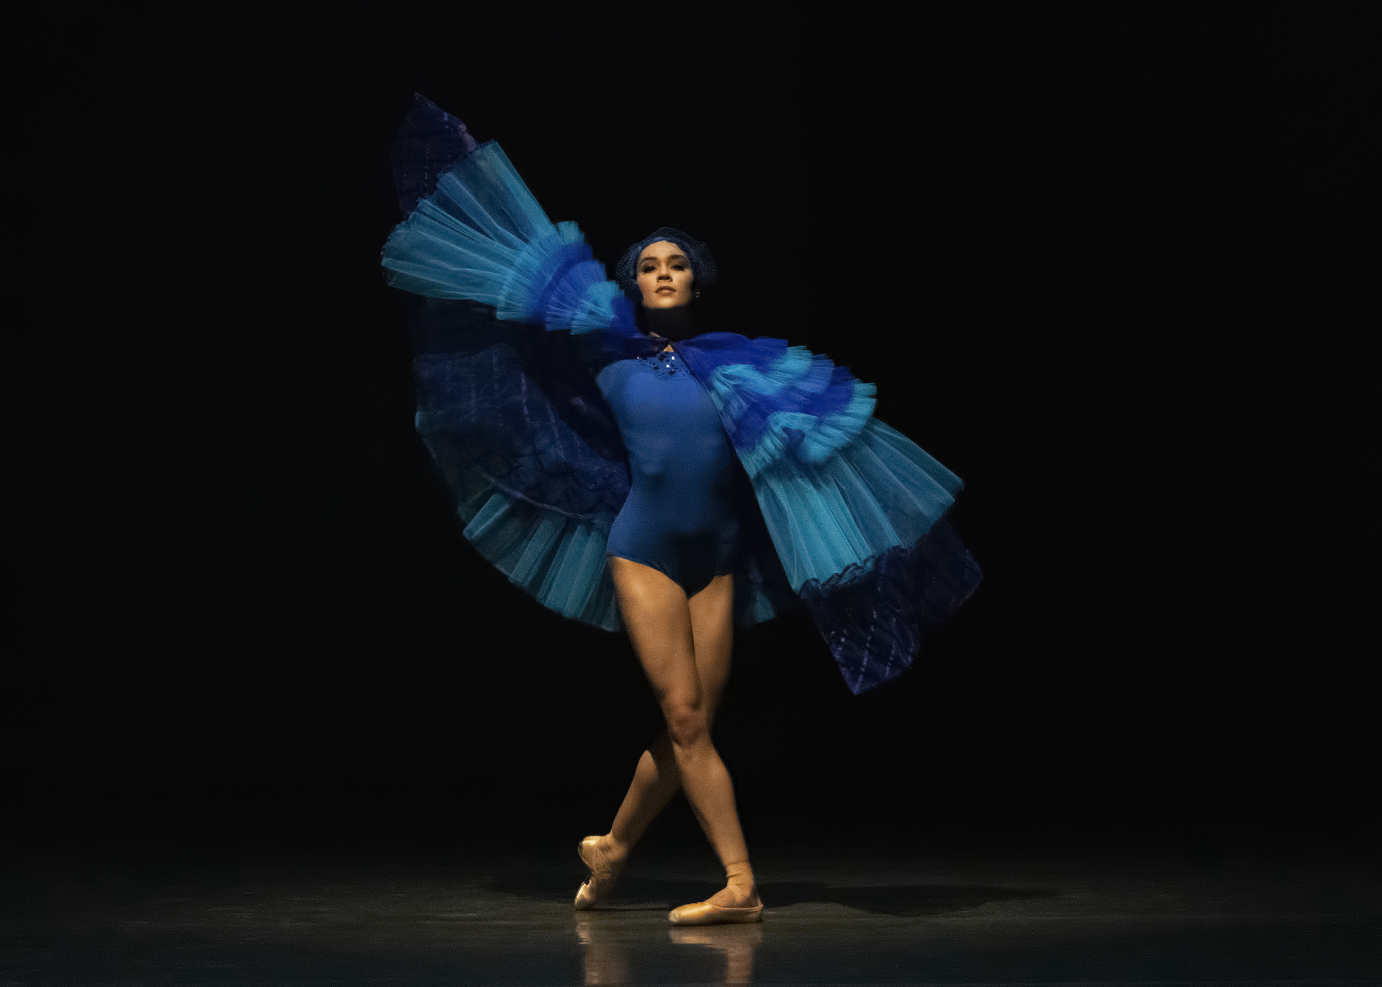 A woman in a blue leotard with tulle wings stands in B-plus, facing the camera straight on.